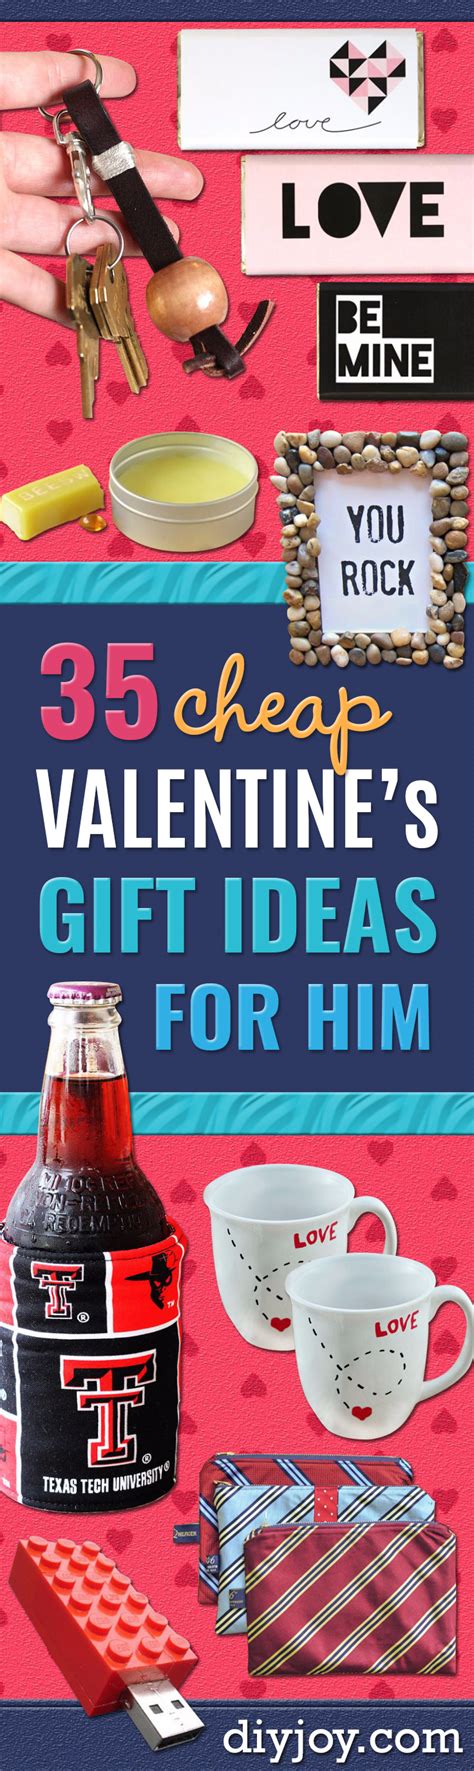 We did not find results for: 35 Cheap Valentine's Gift Ideas for Him